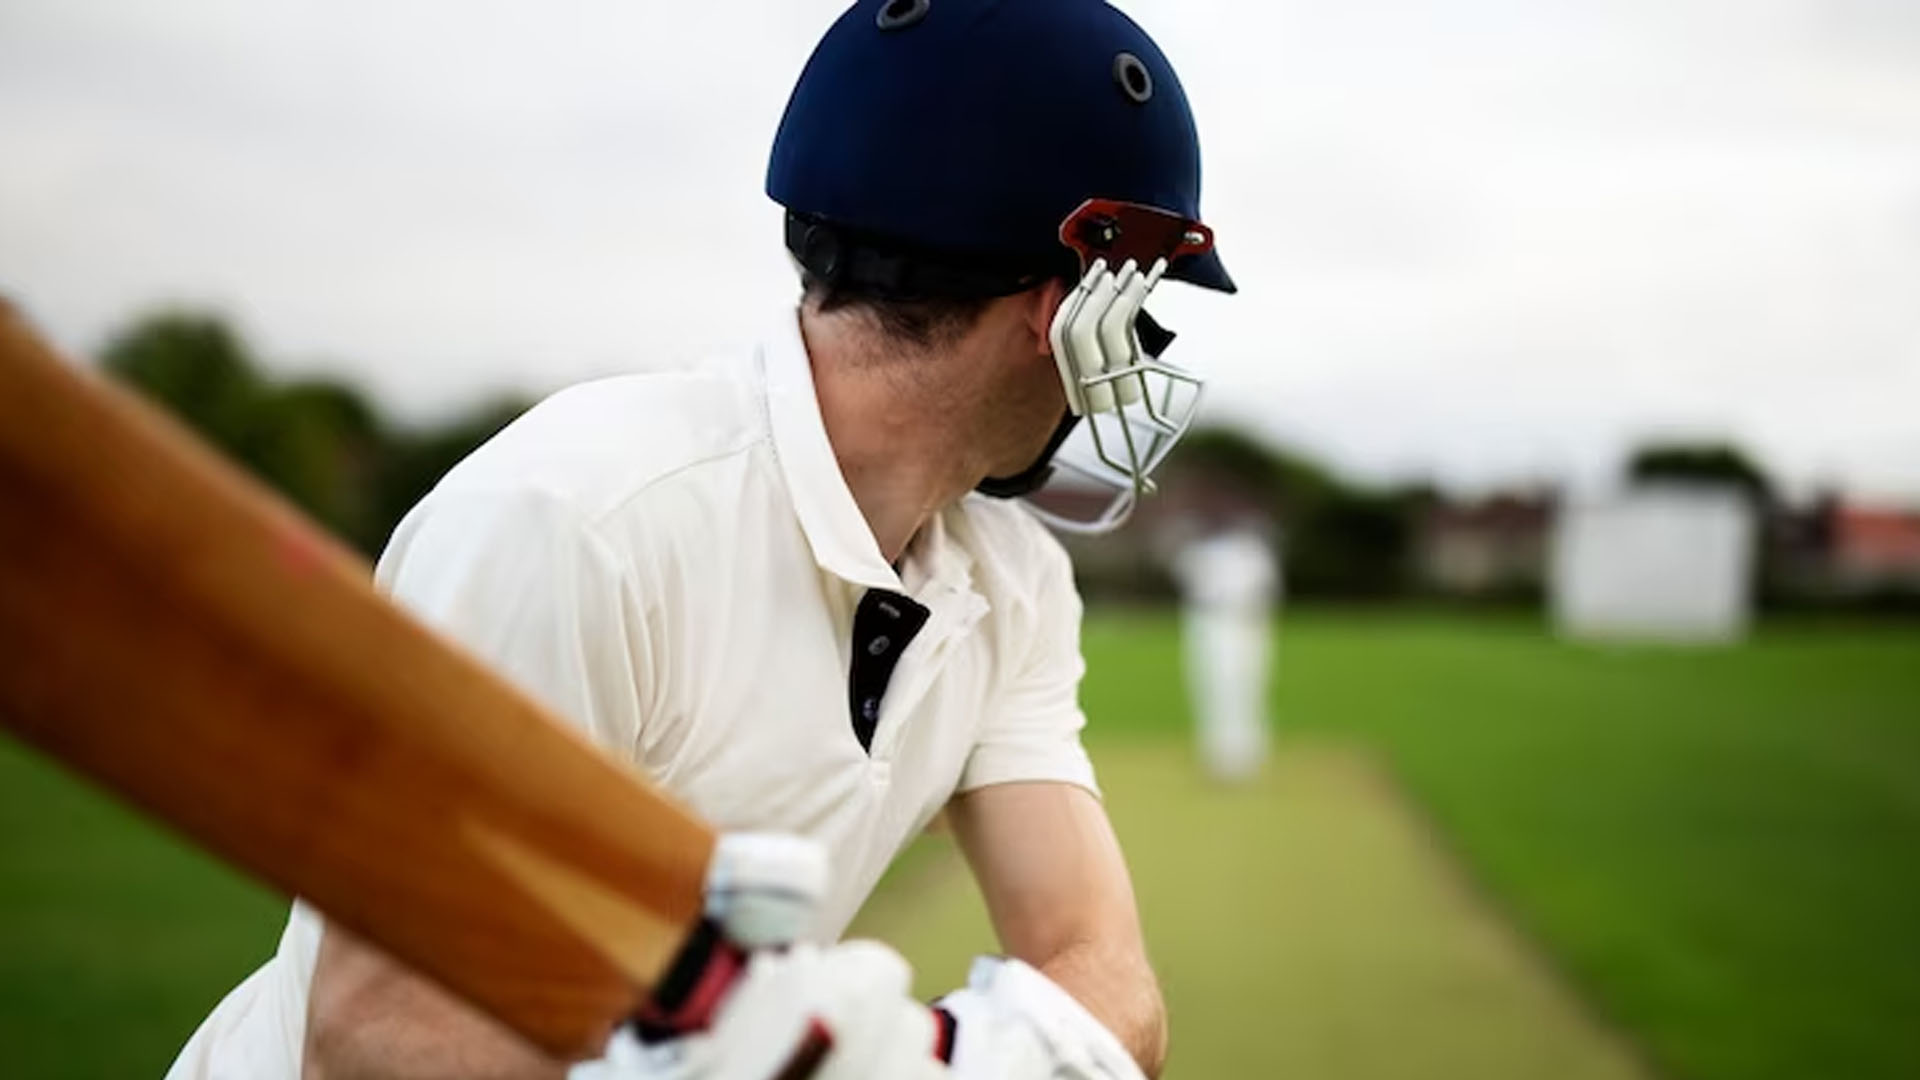 What Are The Health Benefits of Playing Cricket?